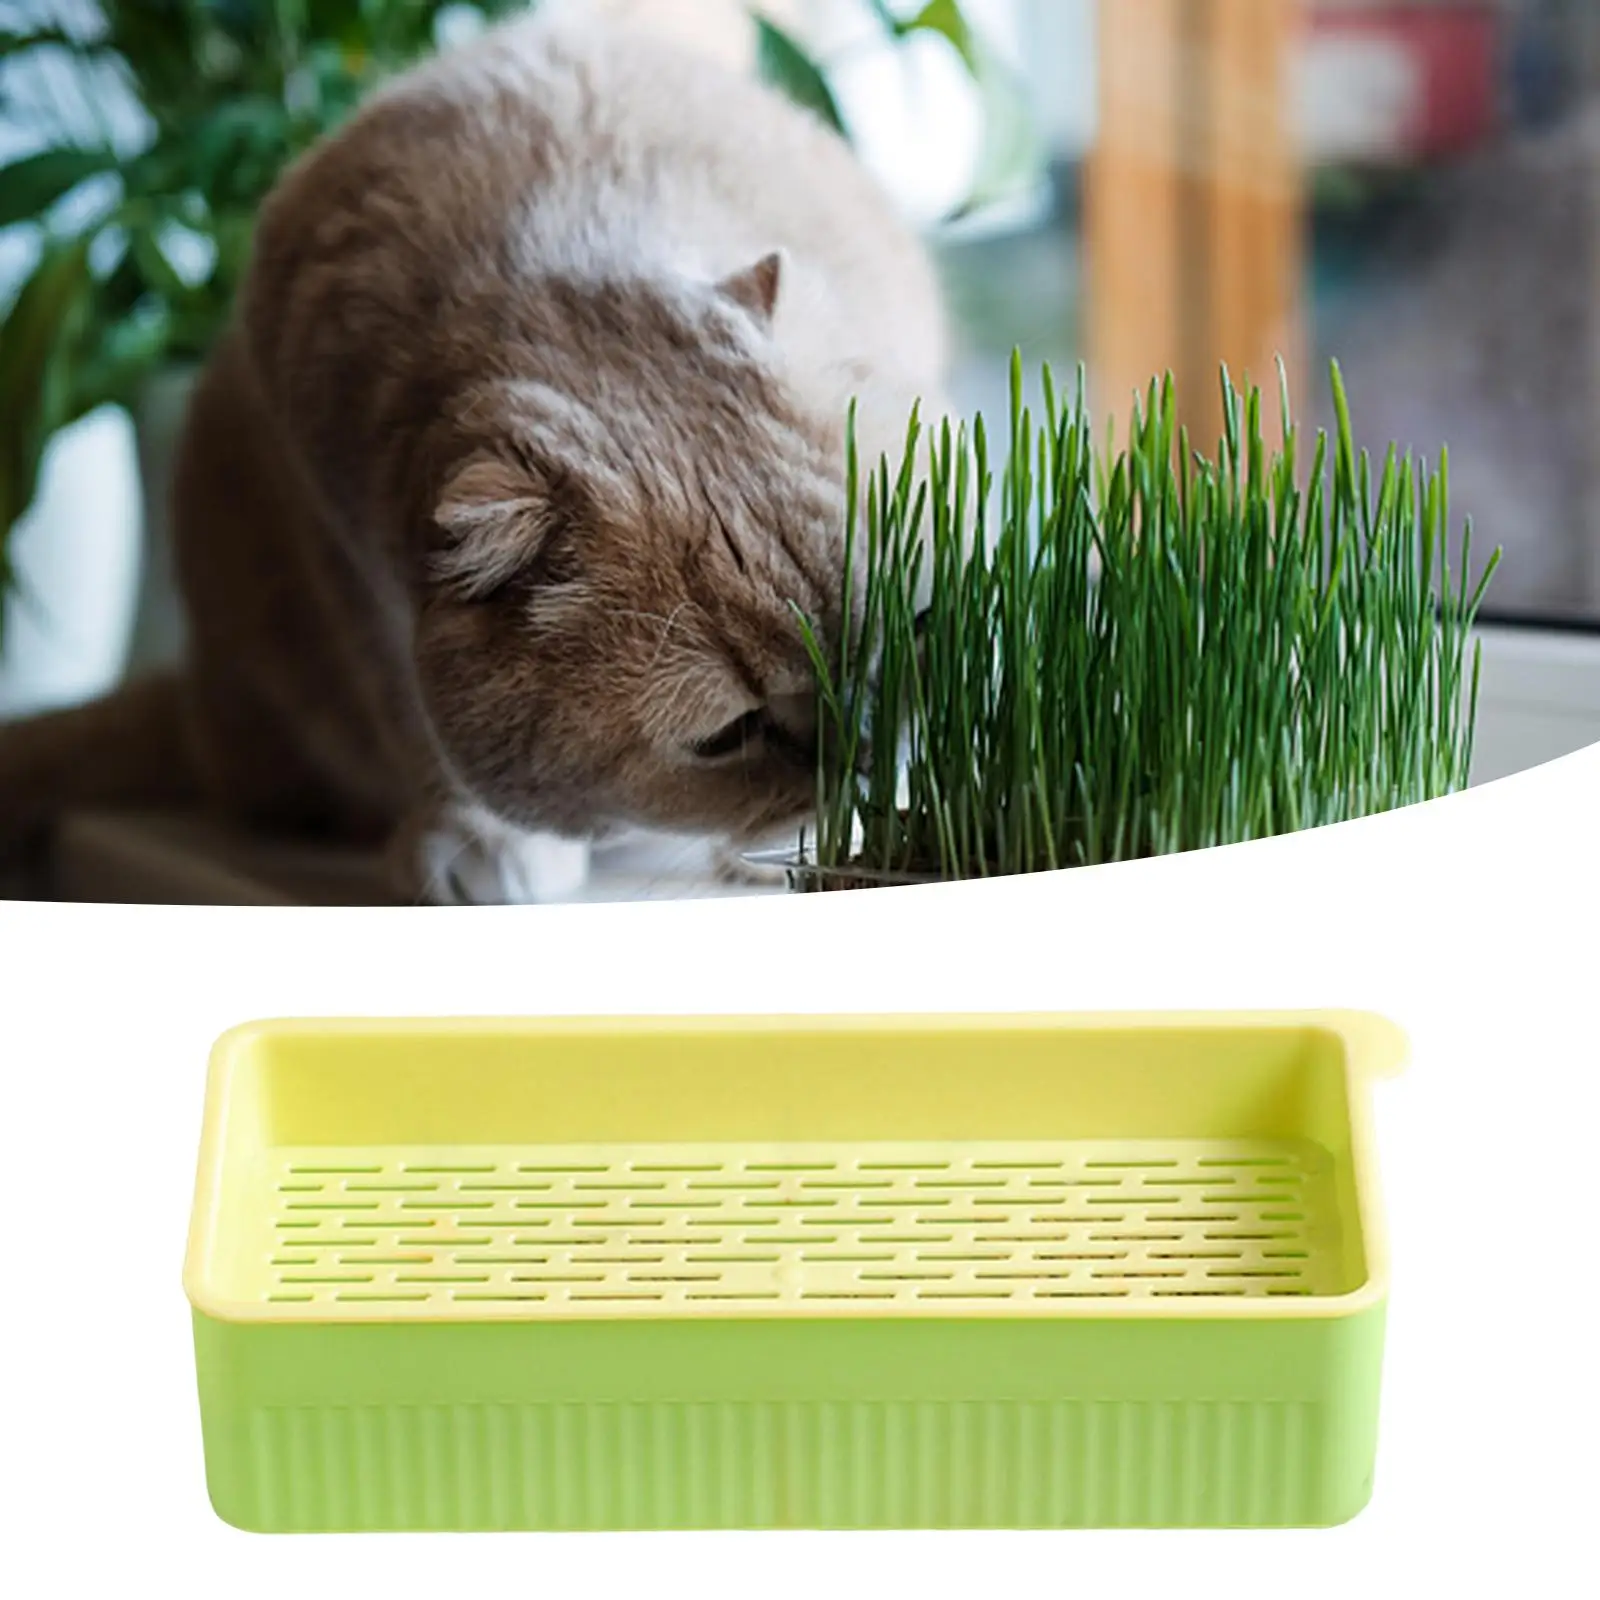 Nursery Tray Seed Germination Trays Pet Cats Grass Growing Drain Holes Cats Grass Hydroponic Box for Seedling Planting